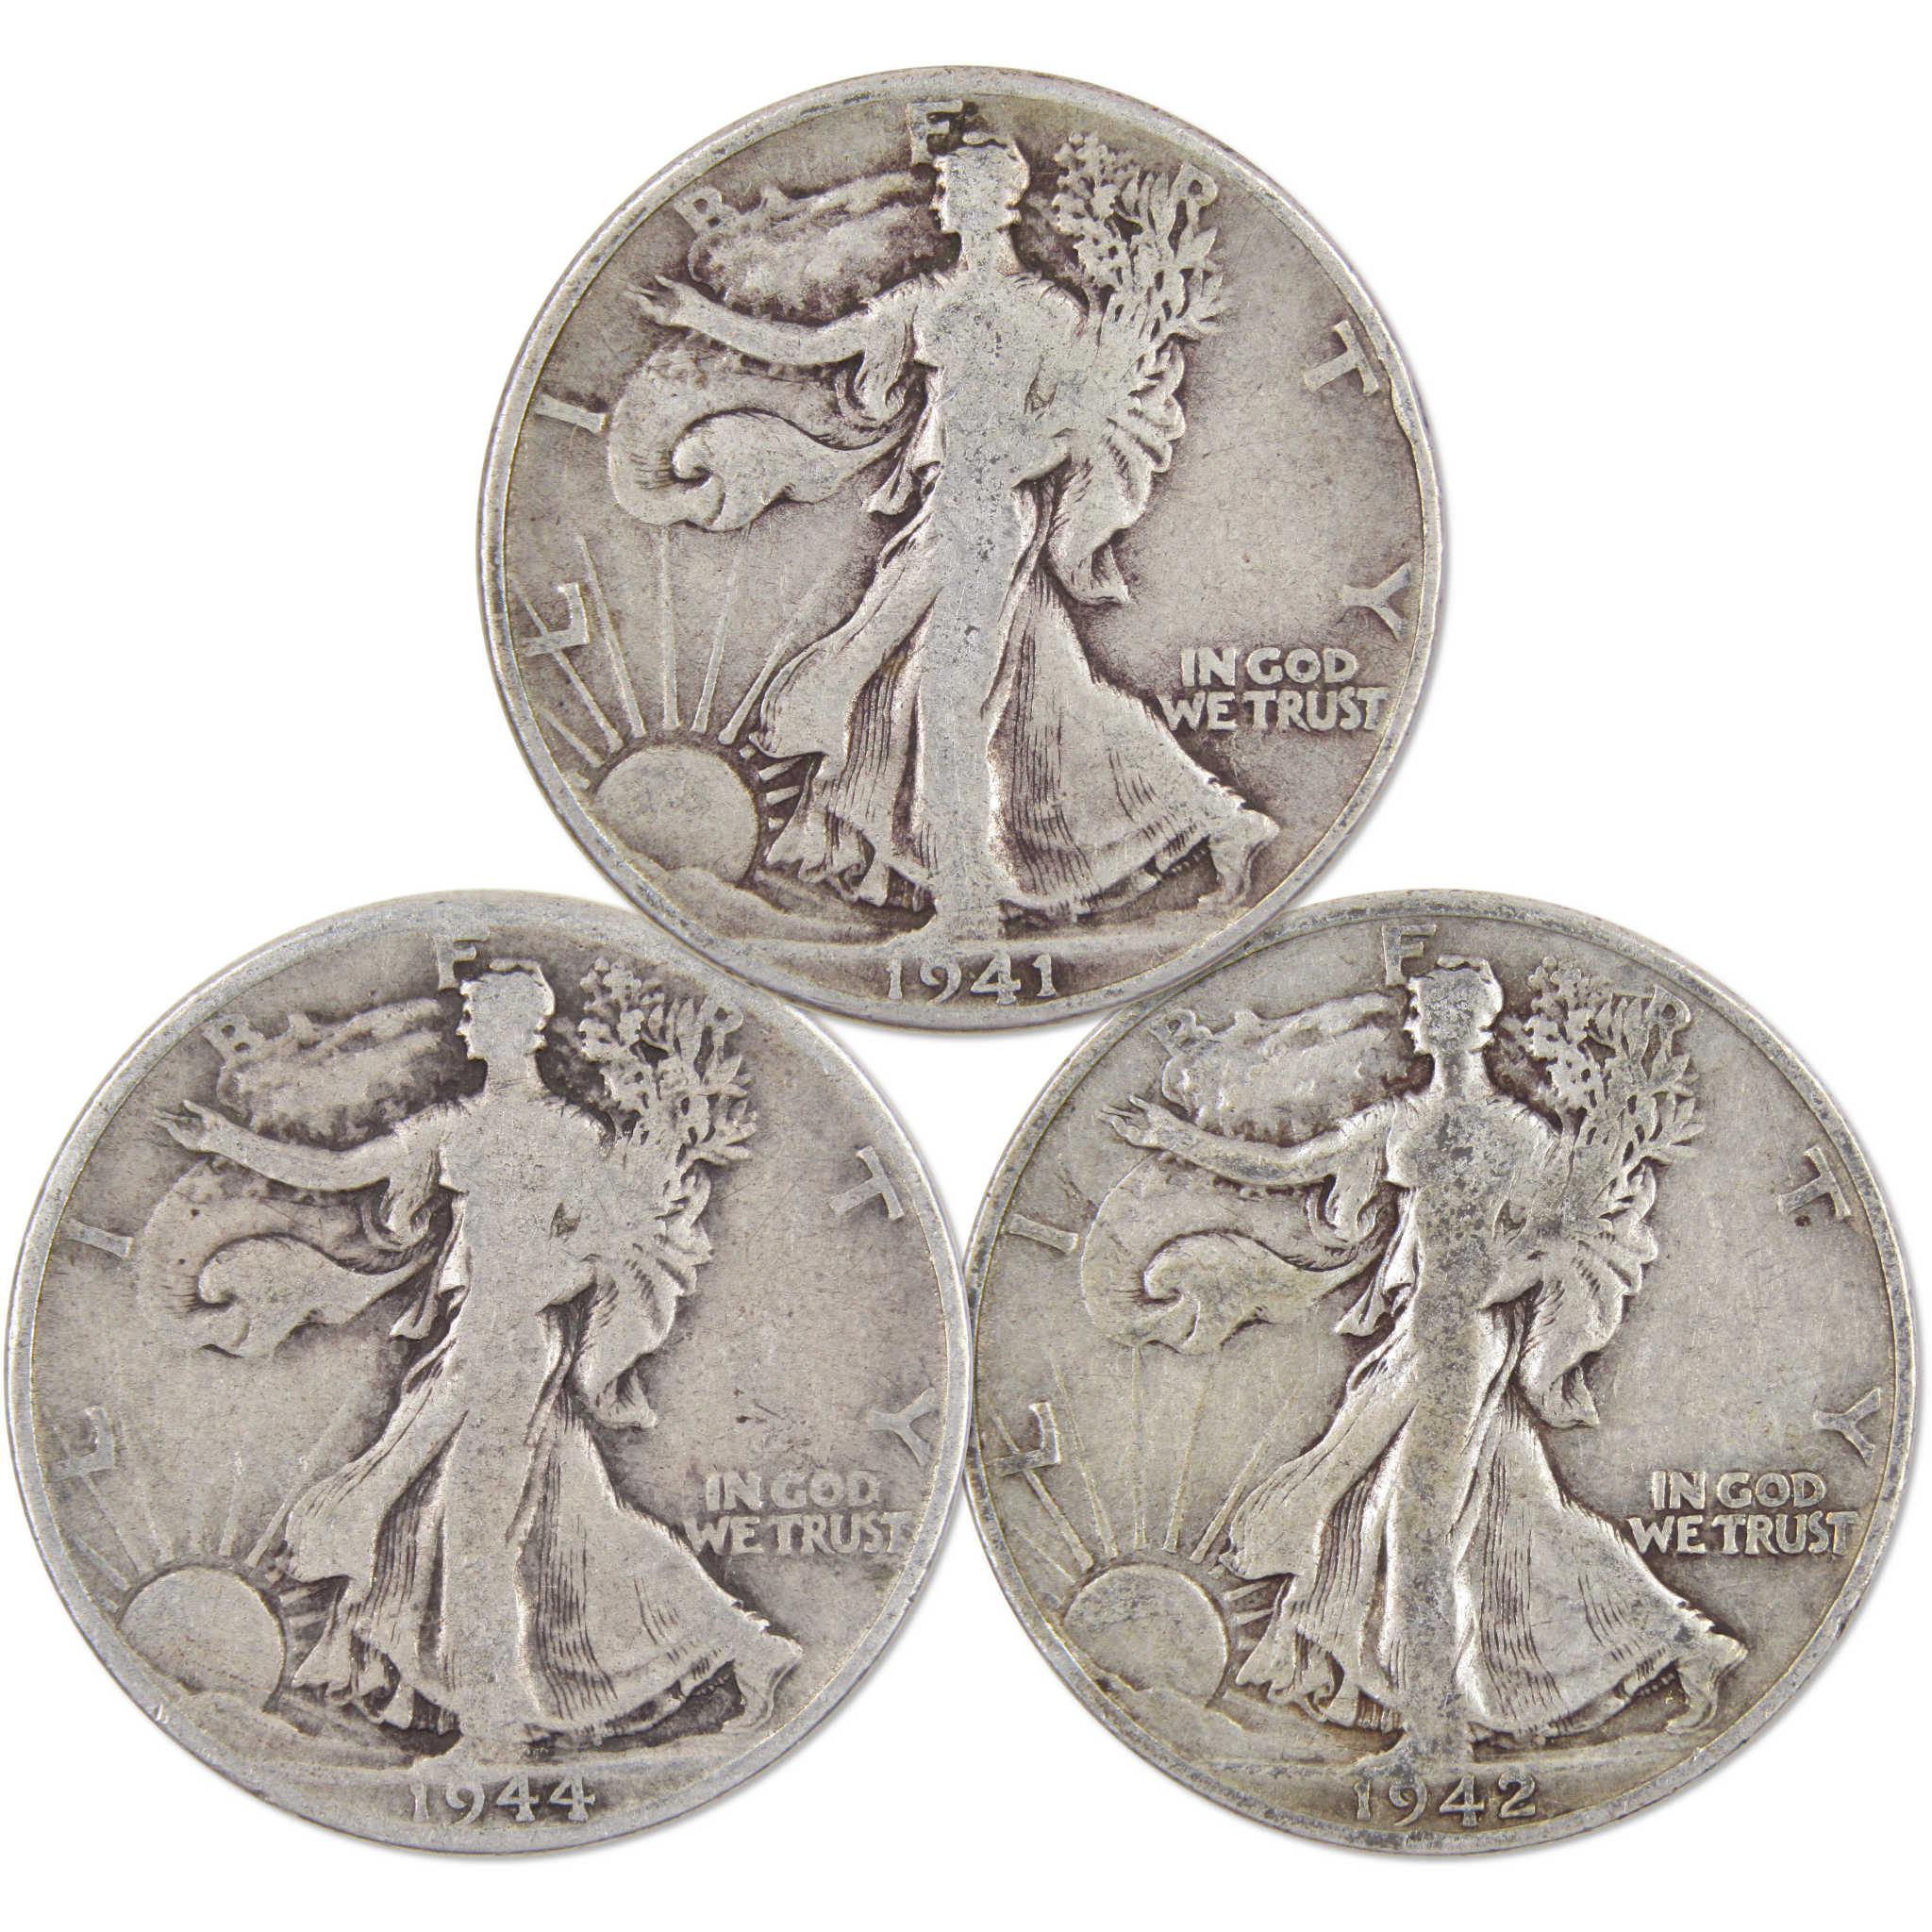 Liberty Walking Half Dollar 3 Coin PDS All Mint Gift Set VG 90% Silver 50c